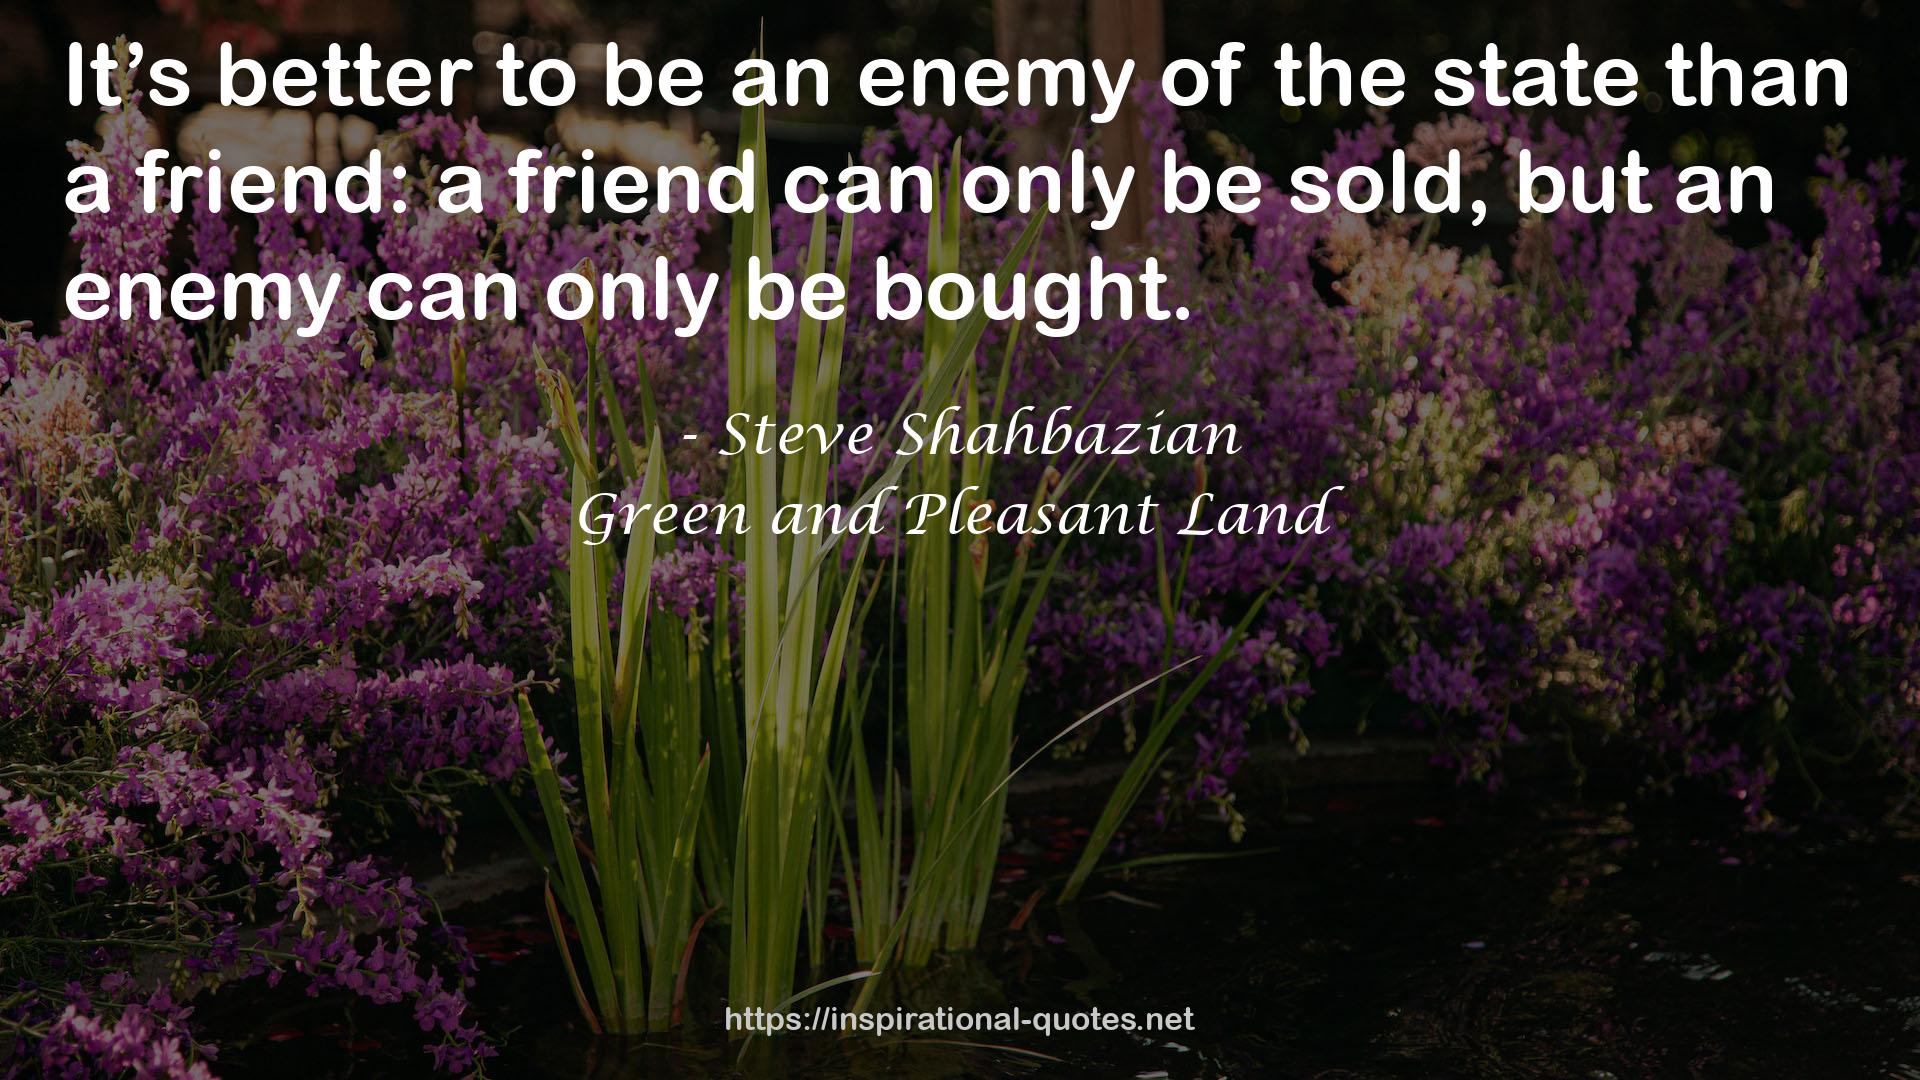 Green and Pleasant Land QUOTES